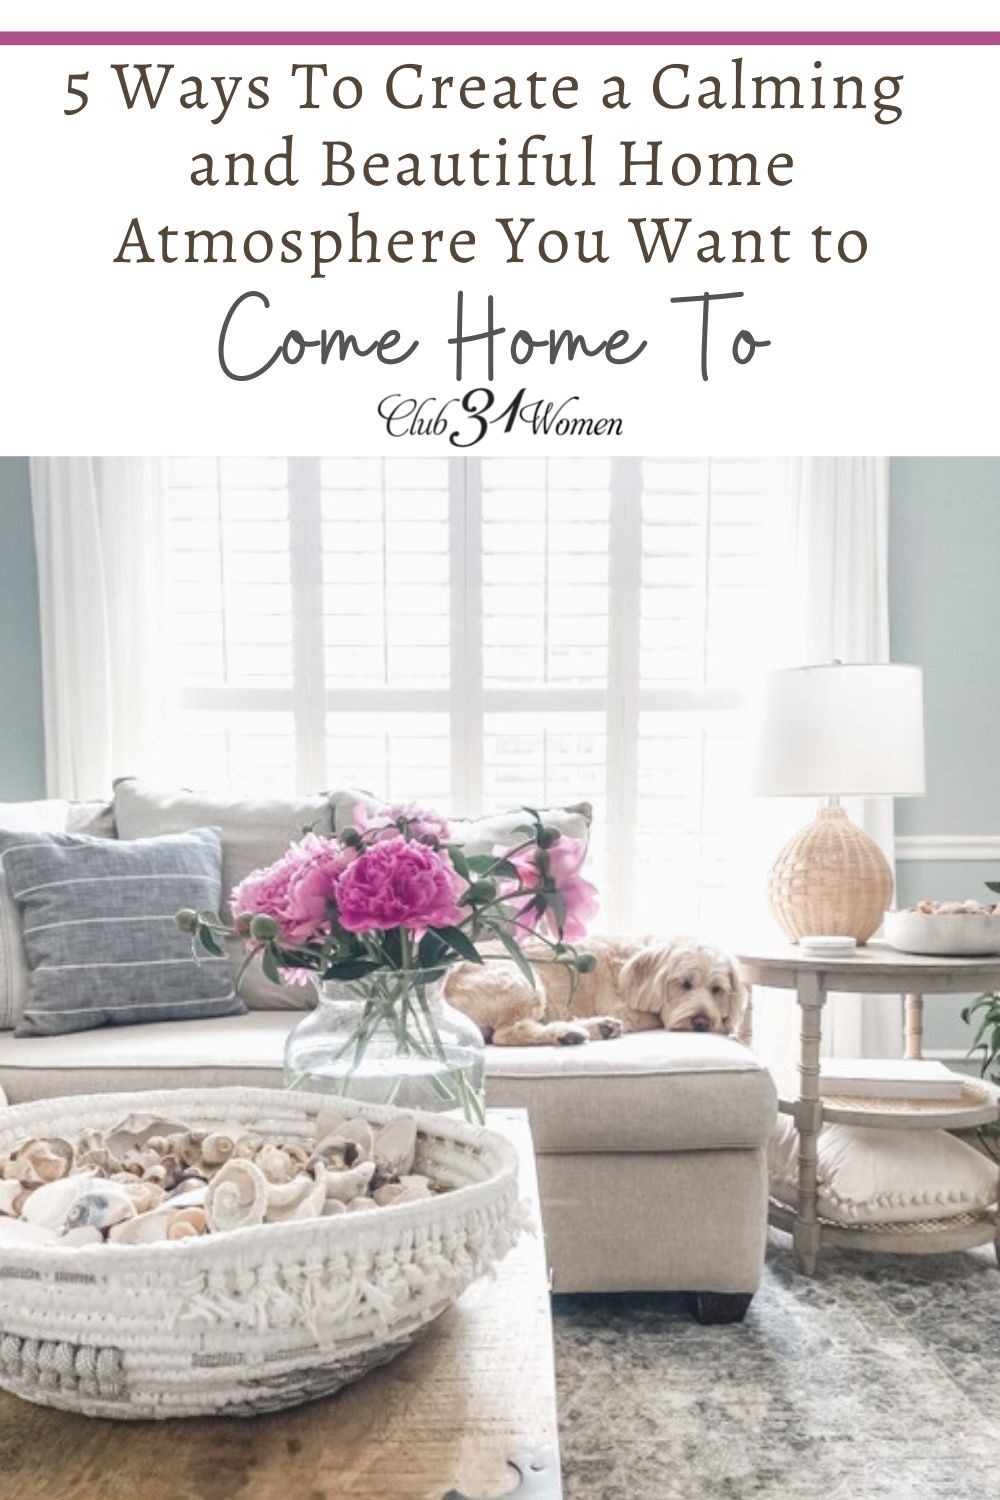 Creating a home atmosphere can bring so much peace and calm to a soul. It doesn't need to cost a fortune or be complicated at all! via @Club31Women